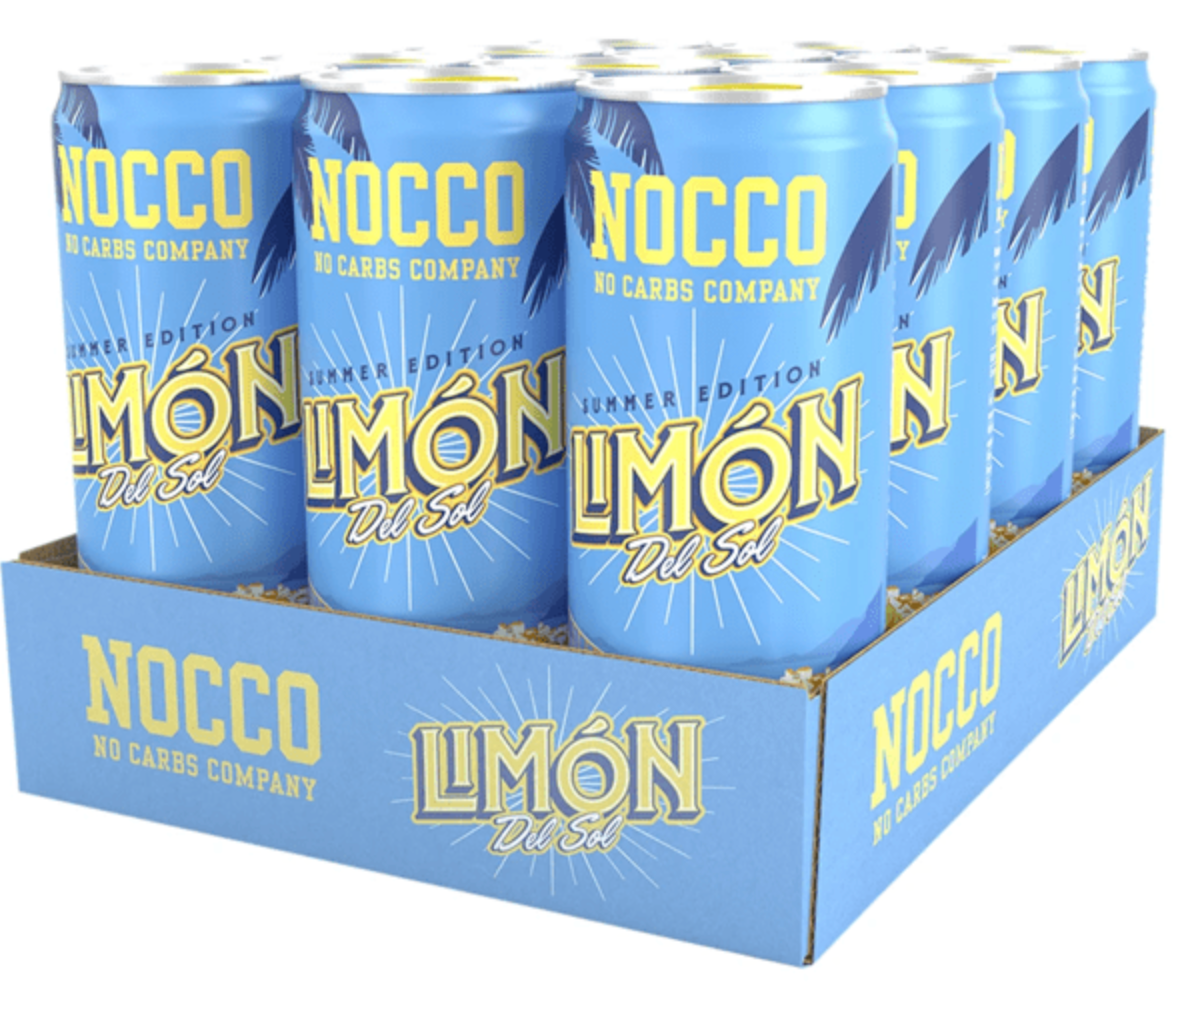 NOCCO BCAA - 330ml Can x 12 (Limon)